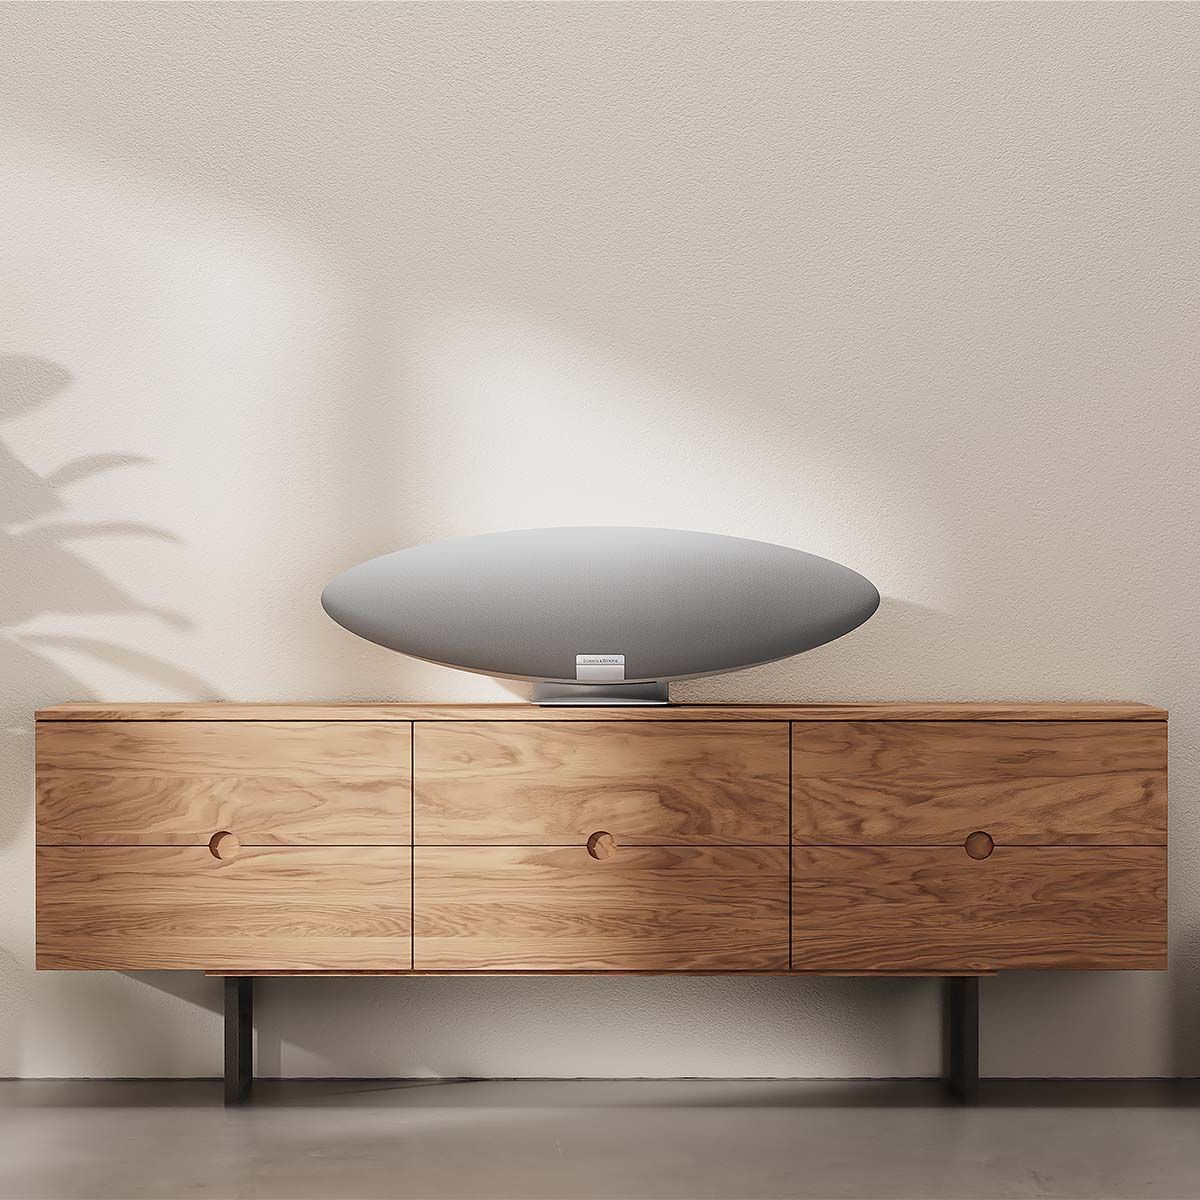 Bowers & Wilkins Zeppelin Wireless Speaker System, Pearl Gray, on light colored media stand